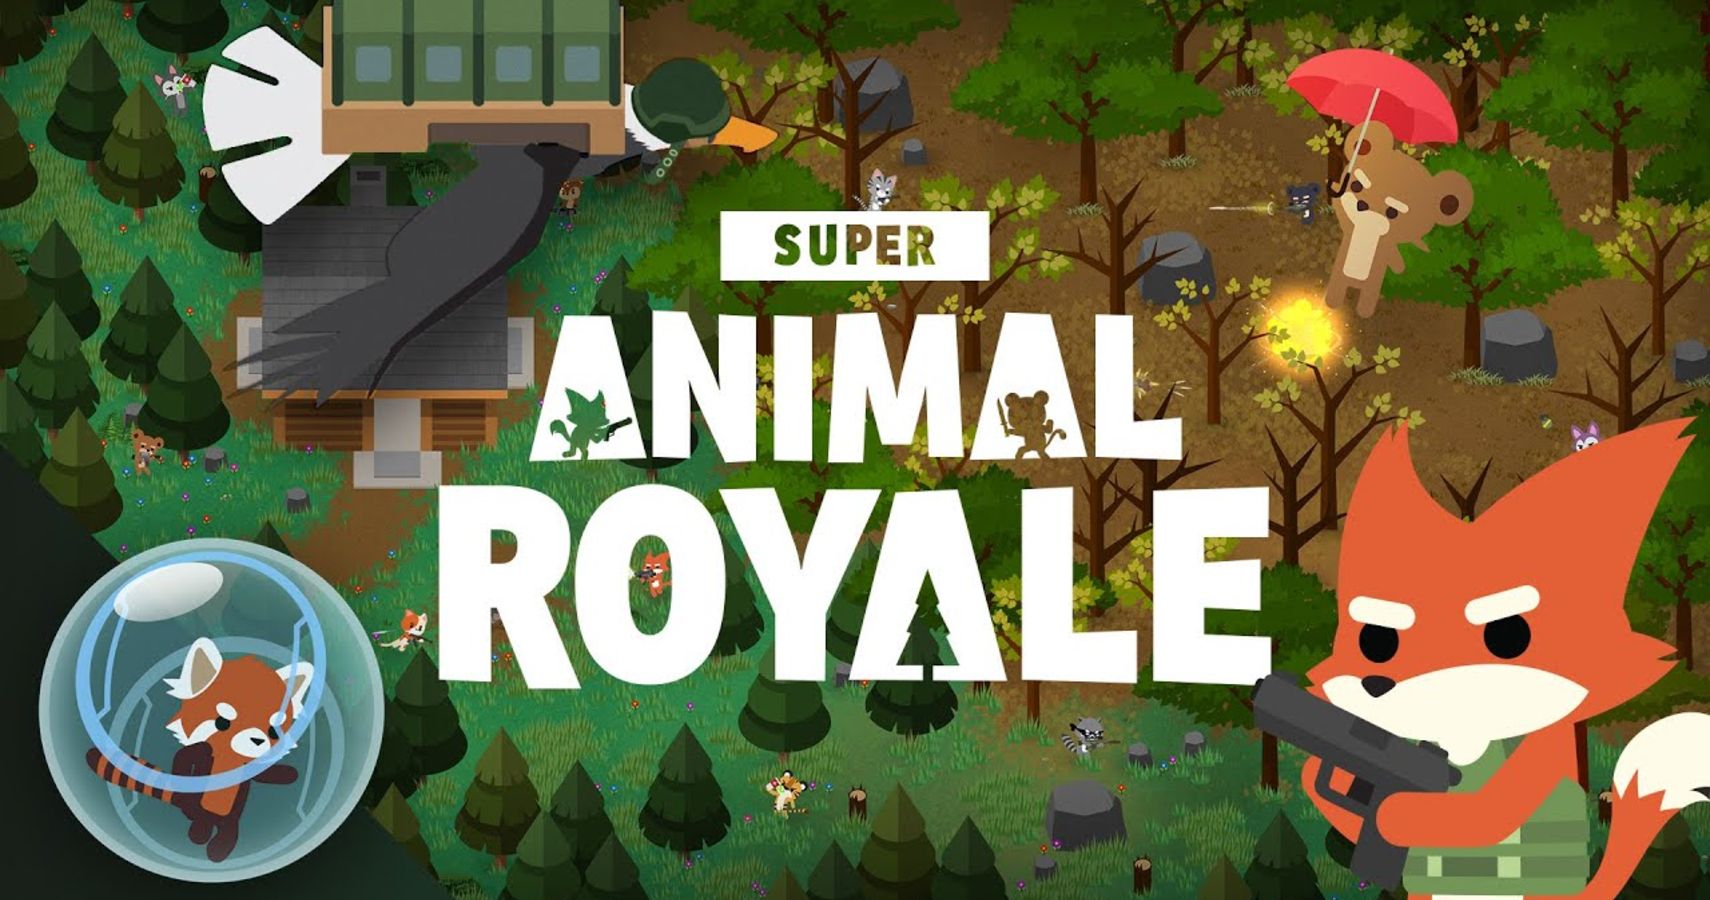 Official Art of the battle royale game Super Animal Royale